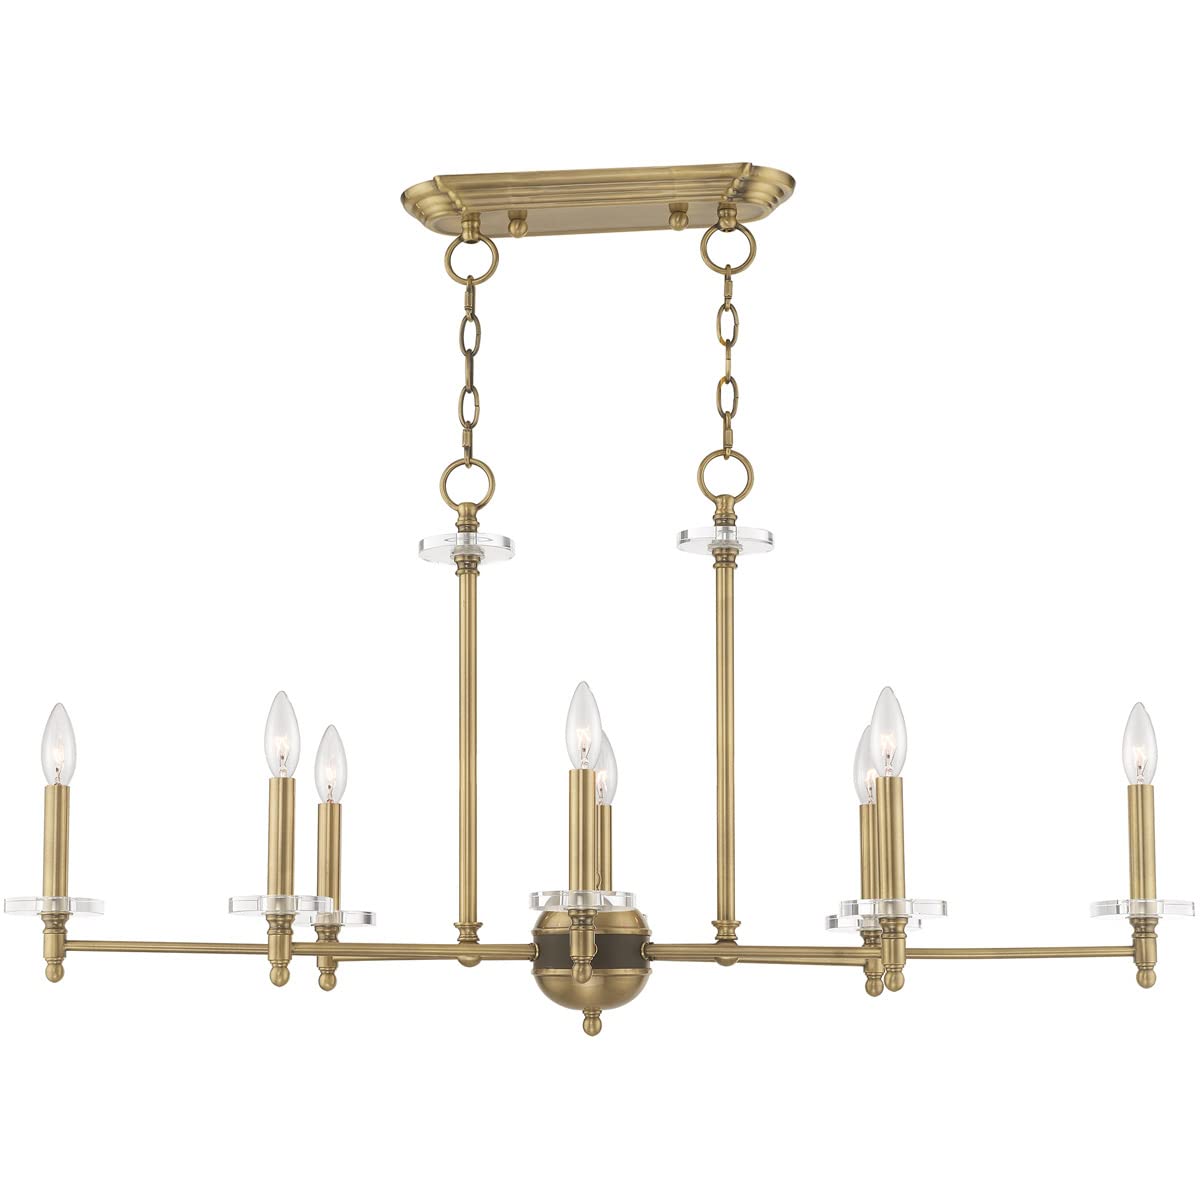 Livex Lighting 42708-01 Bancroft - Eight Light Linear Chandelier, Antique Brass Finish with Clear Bobeche Crystal